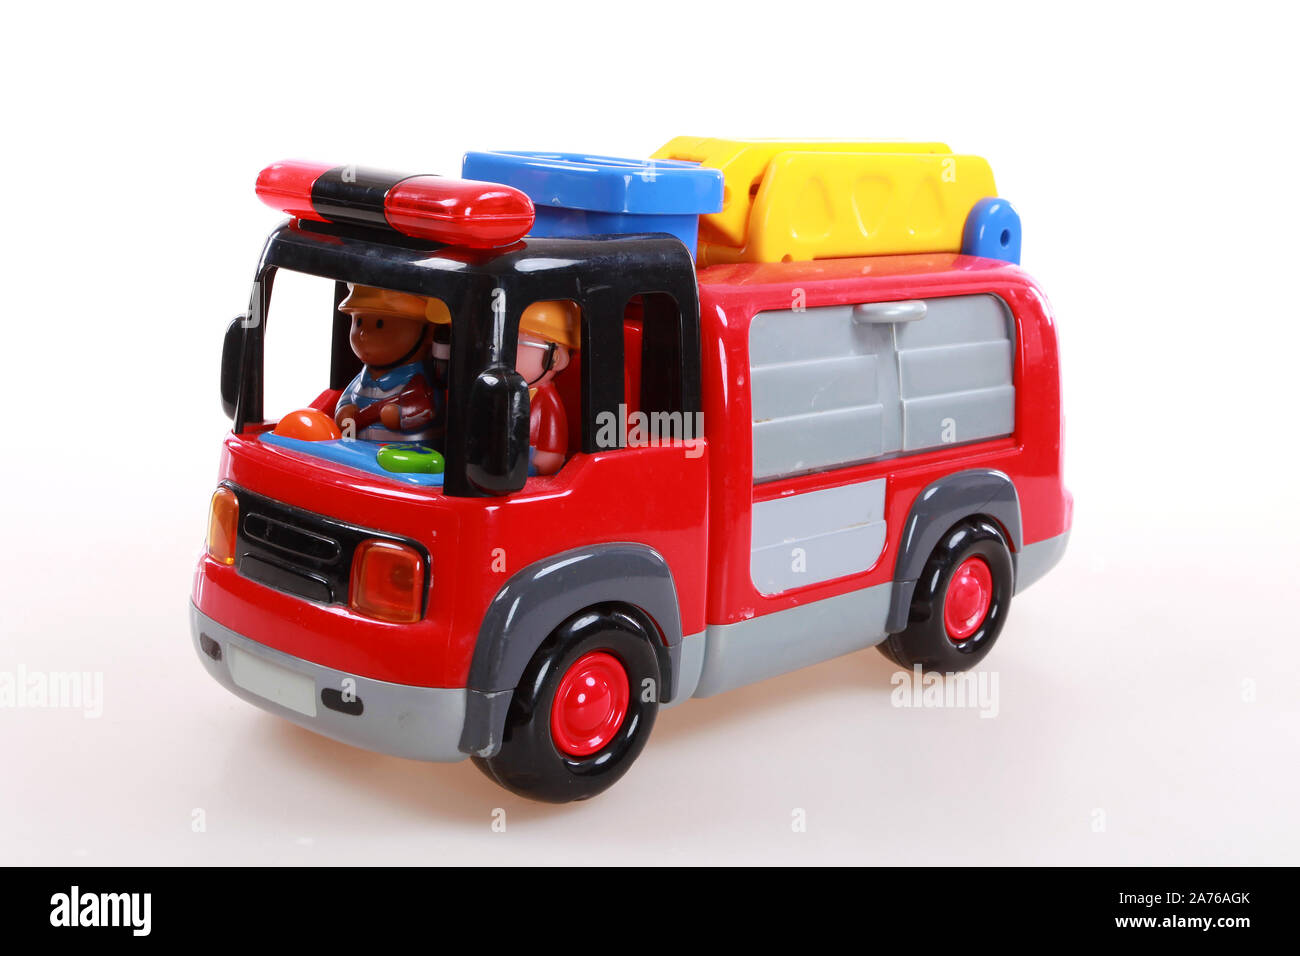 toy fire engine Stock Photo